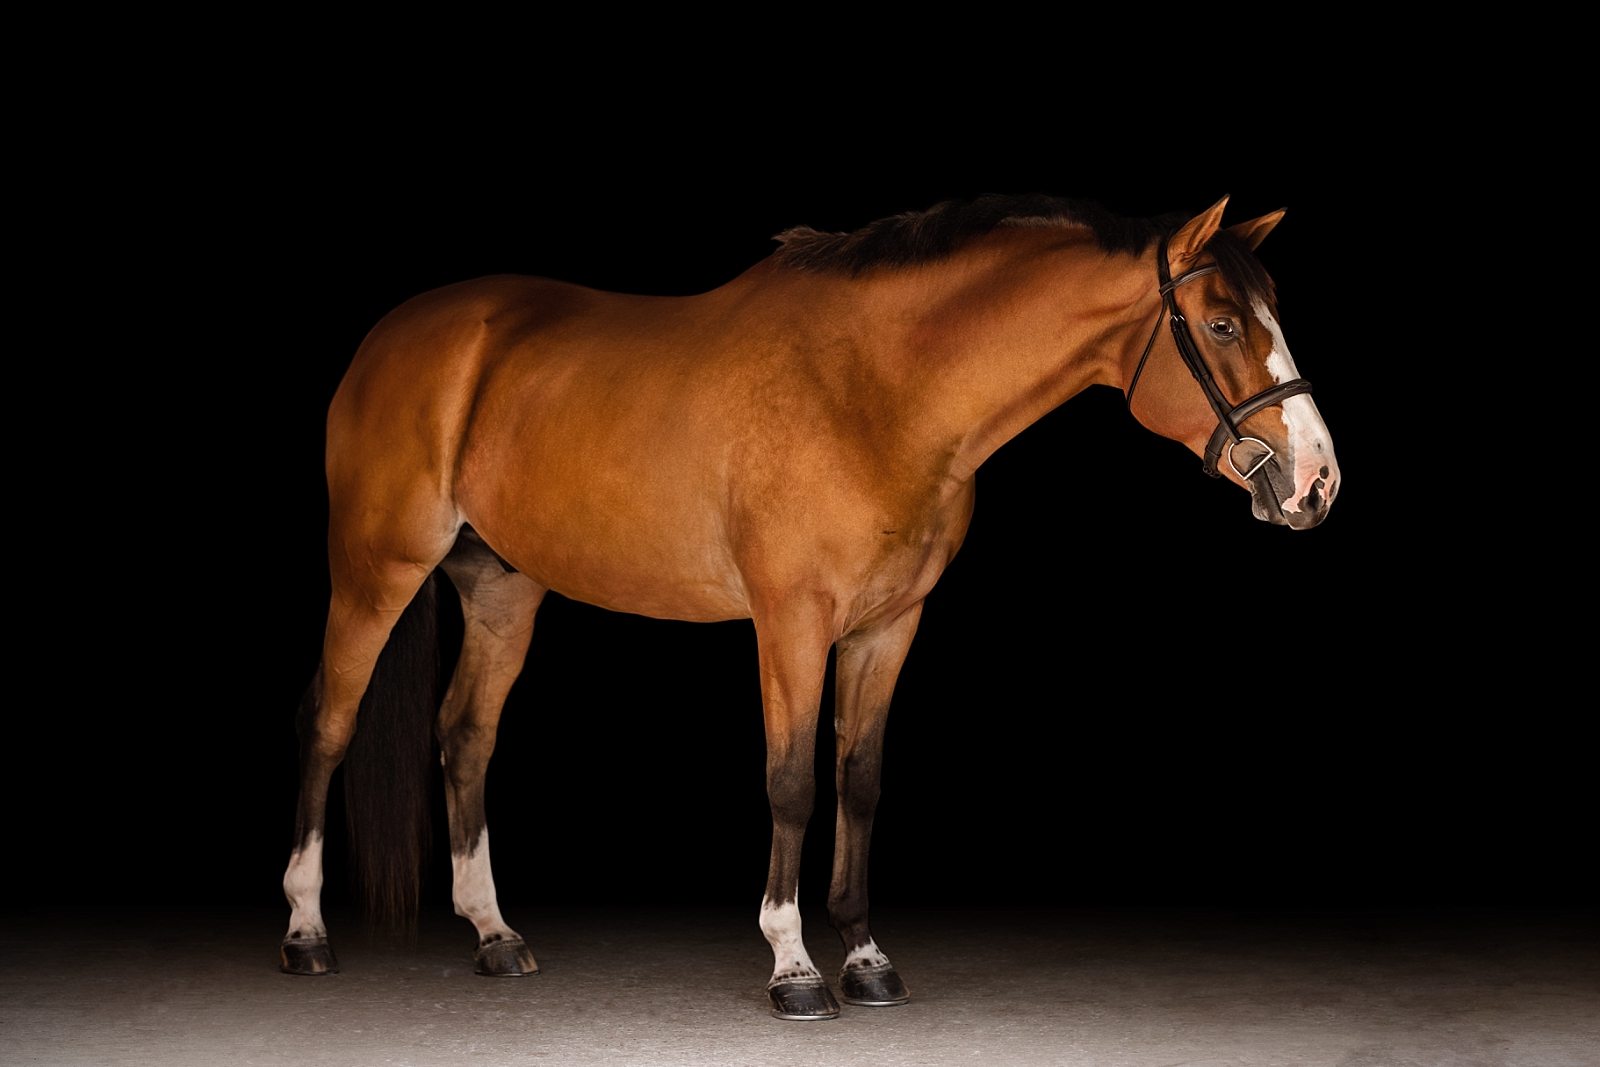 Cute bay hunter jumper gelding photographed on black background by photographer near Tallahassee FL.